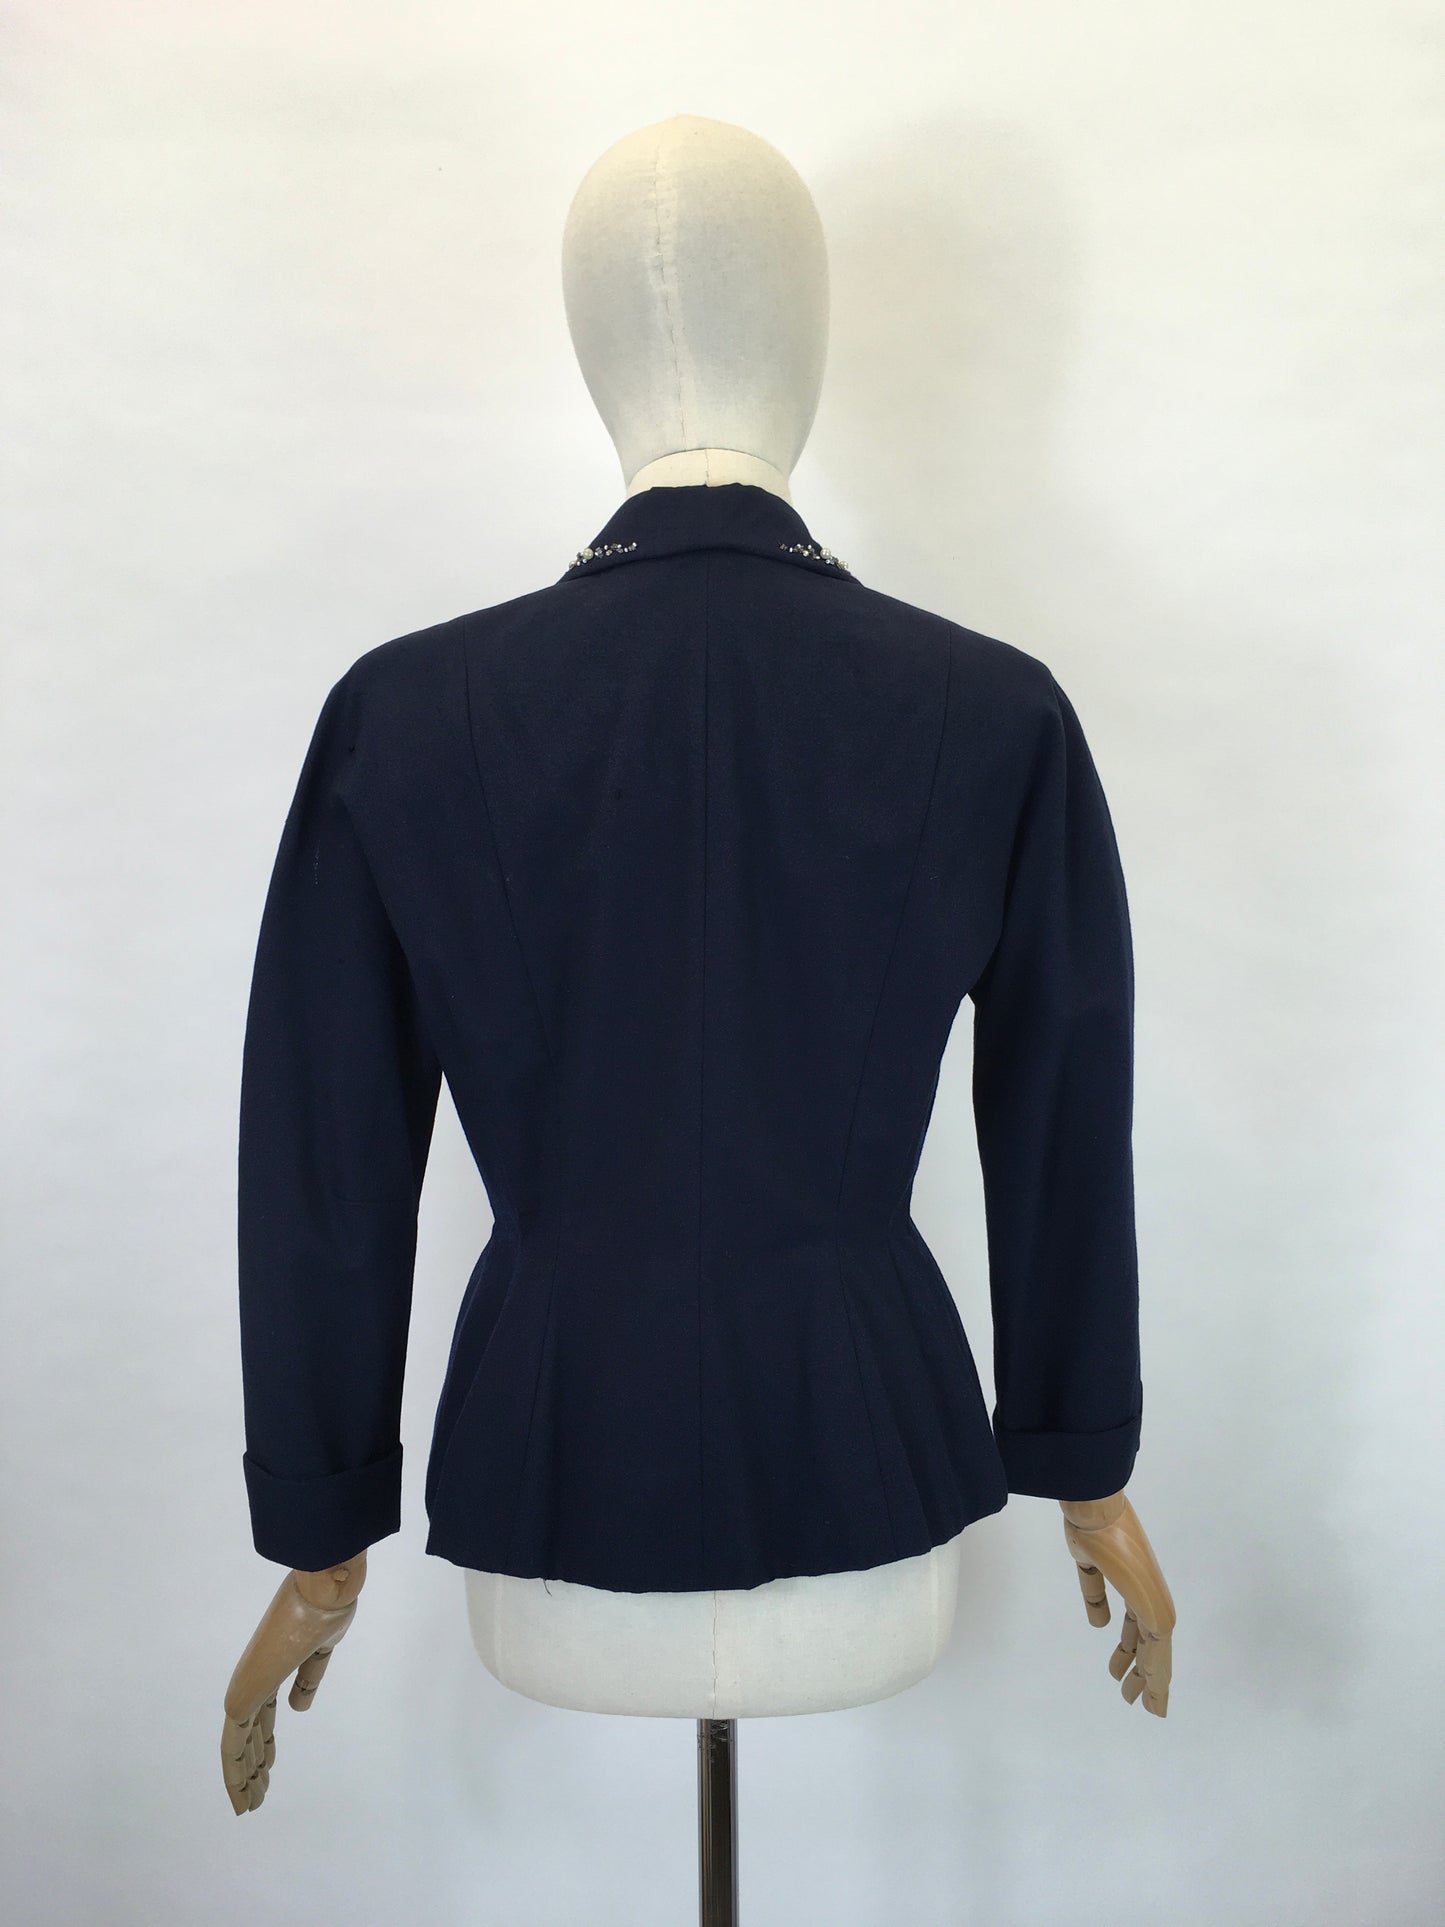 Original 1940’s NRA LABEL Navy Fitted Jacket - With Pearl & Beadwork Embelishment